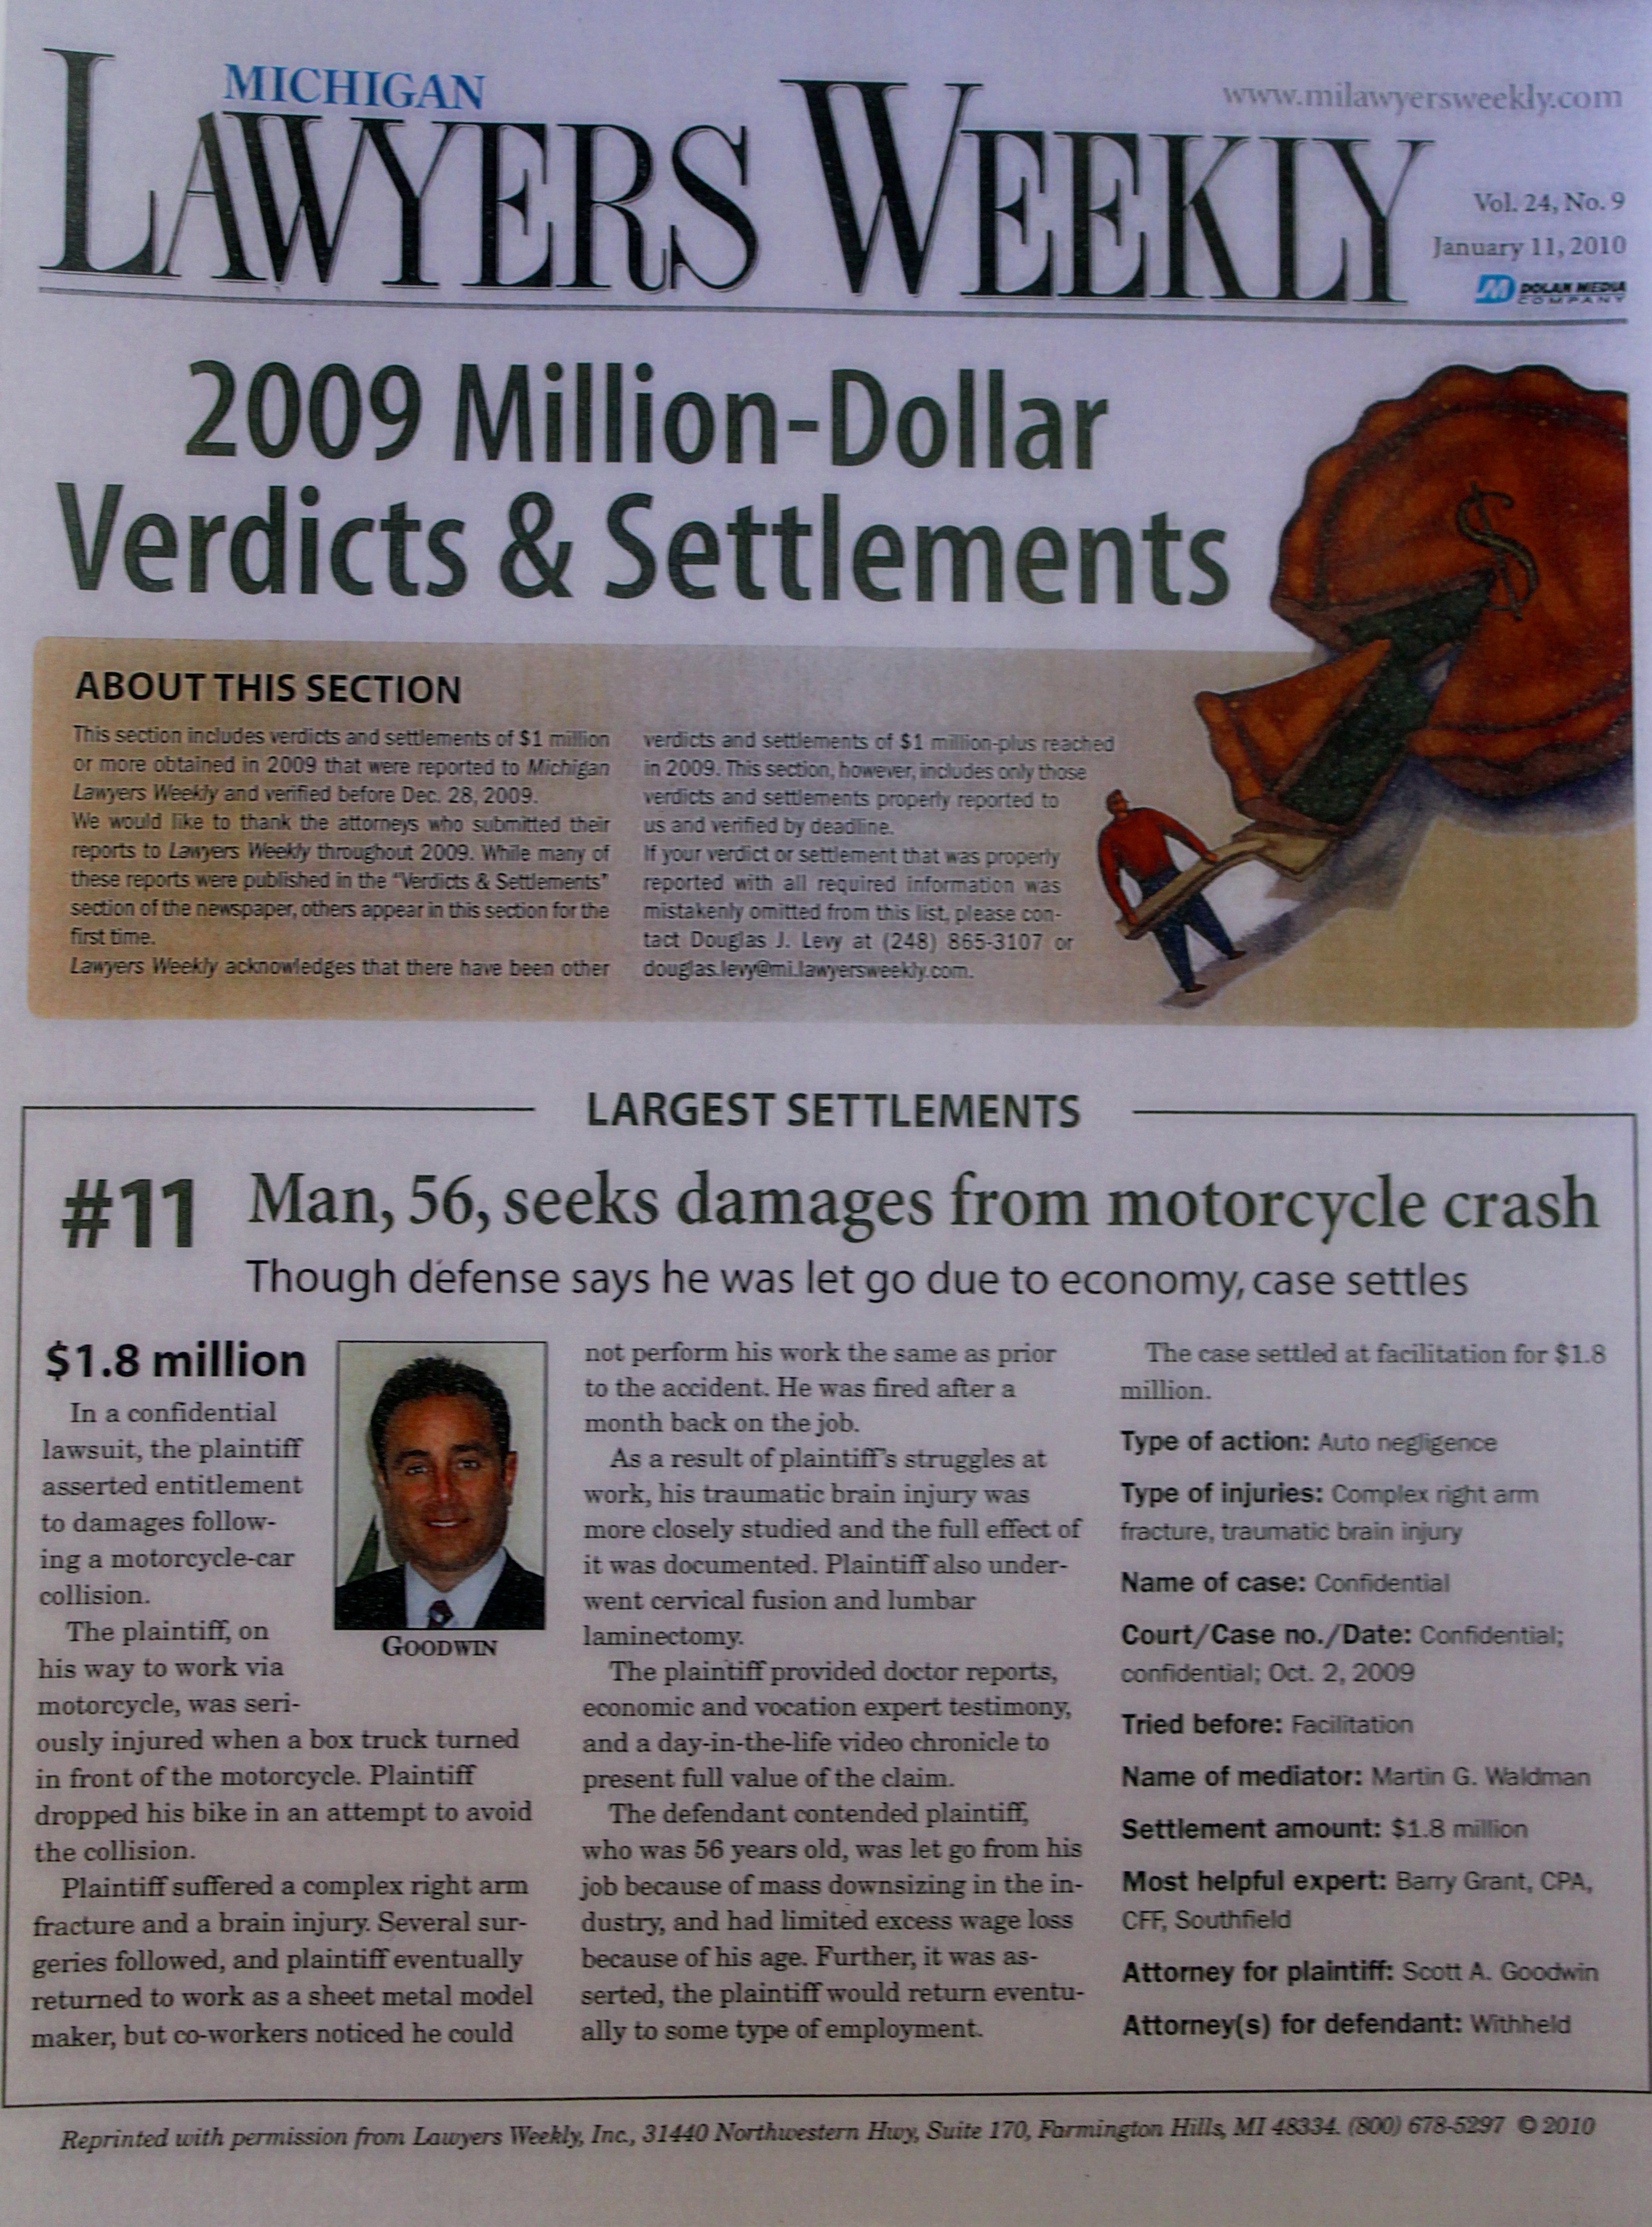 Michigan Lawyers Weekly article - Man, 56, seeks damages from motorcycle crash